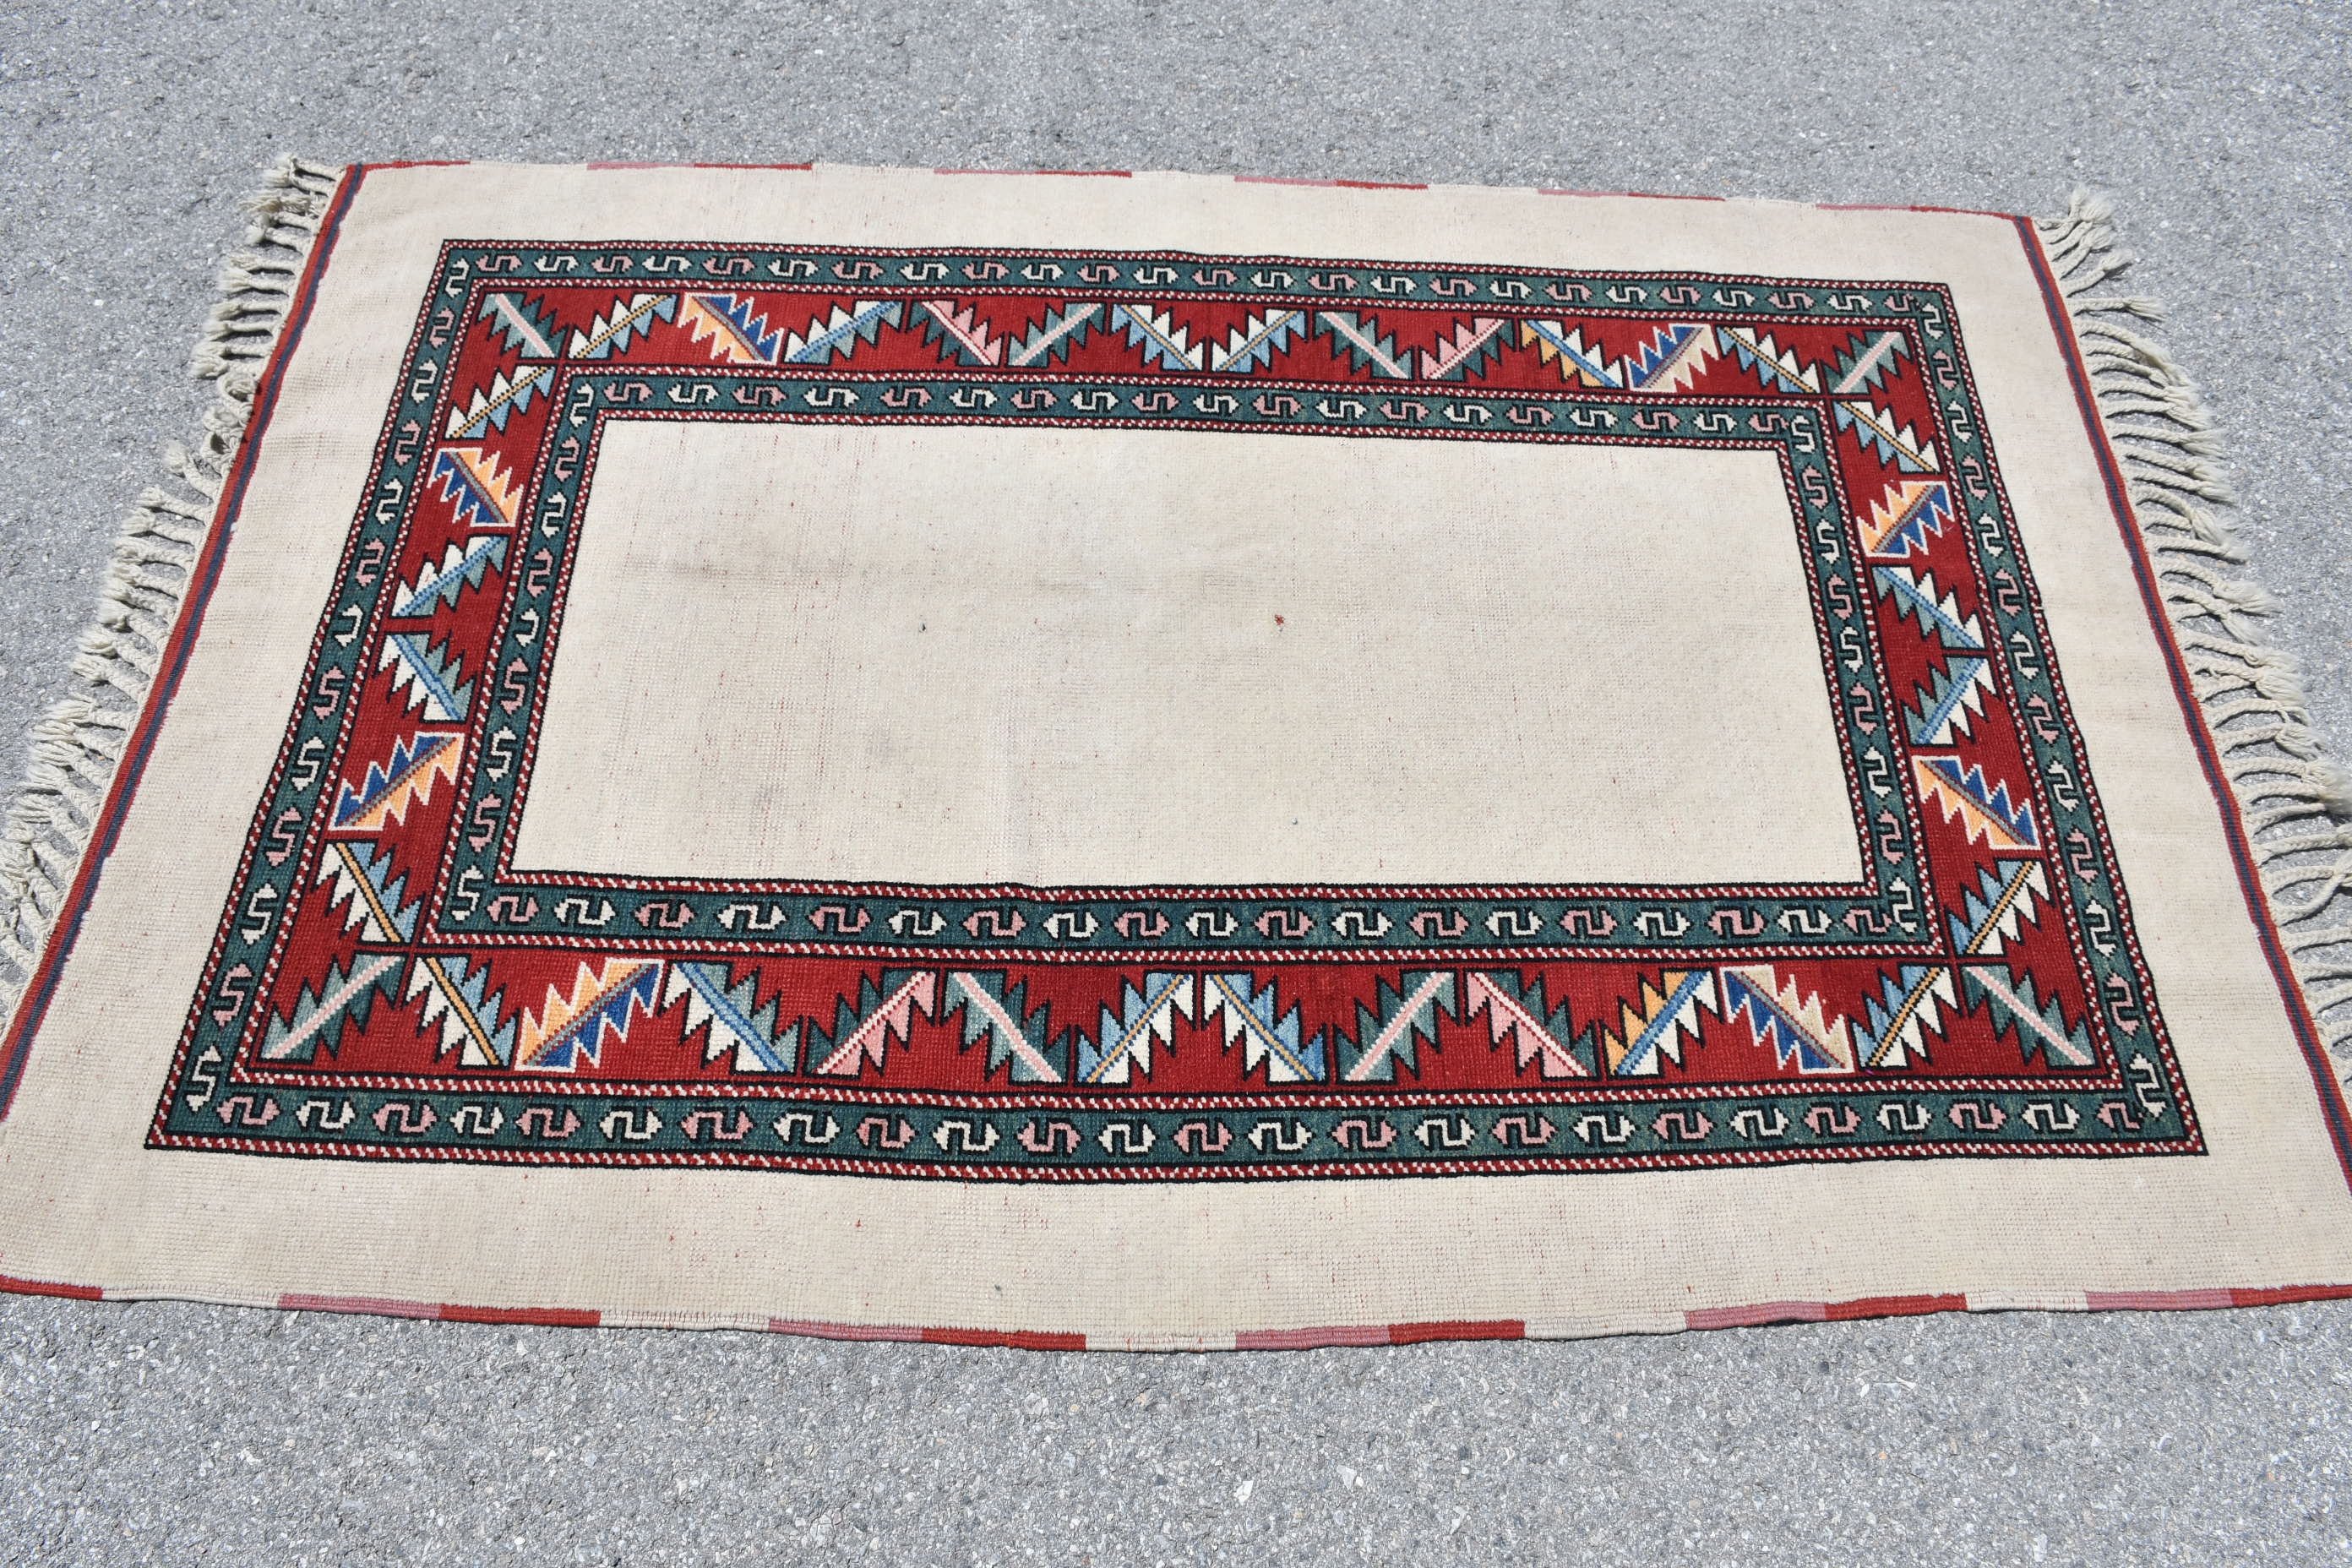 Vintage Rugs, 3.8x5.8 ft Accent Rug, Home Decor Rugs, Rugs for Bedroom, Entry Rug, Antique Rugs, Turkish Rug, Nomadic Rugs, Nursery Rugs